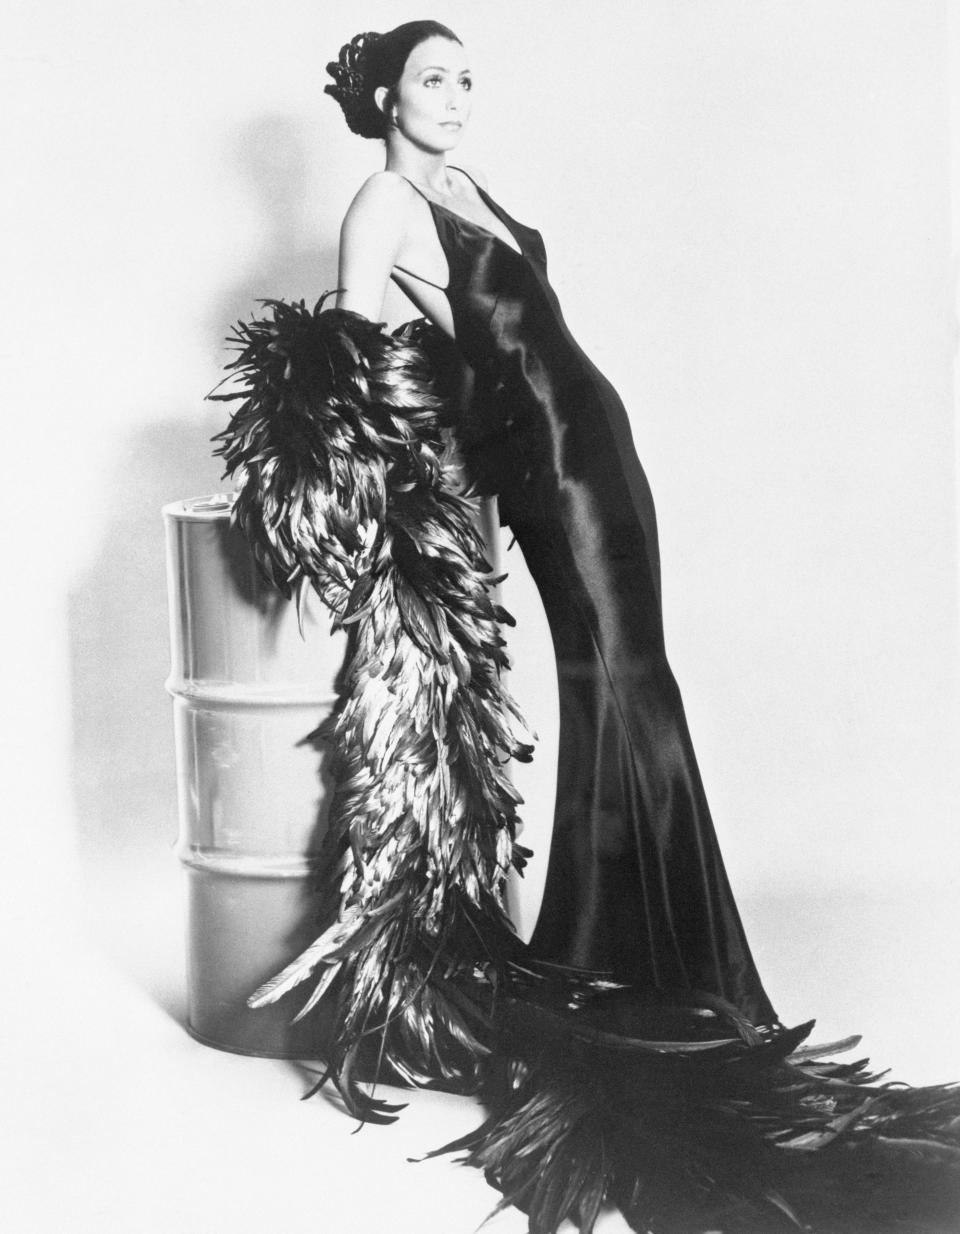 Singer Cher Bono, modeling elegant gowns and outfits. Photo shows Cher modeling a sleek black gown leaning on a white tin, with a long black boa.